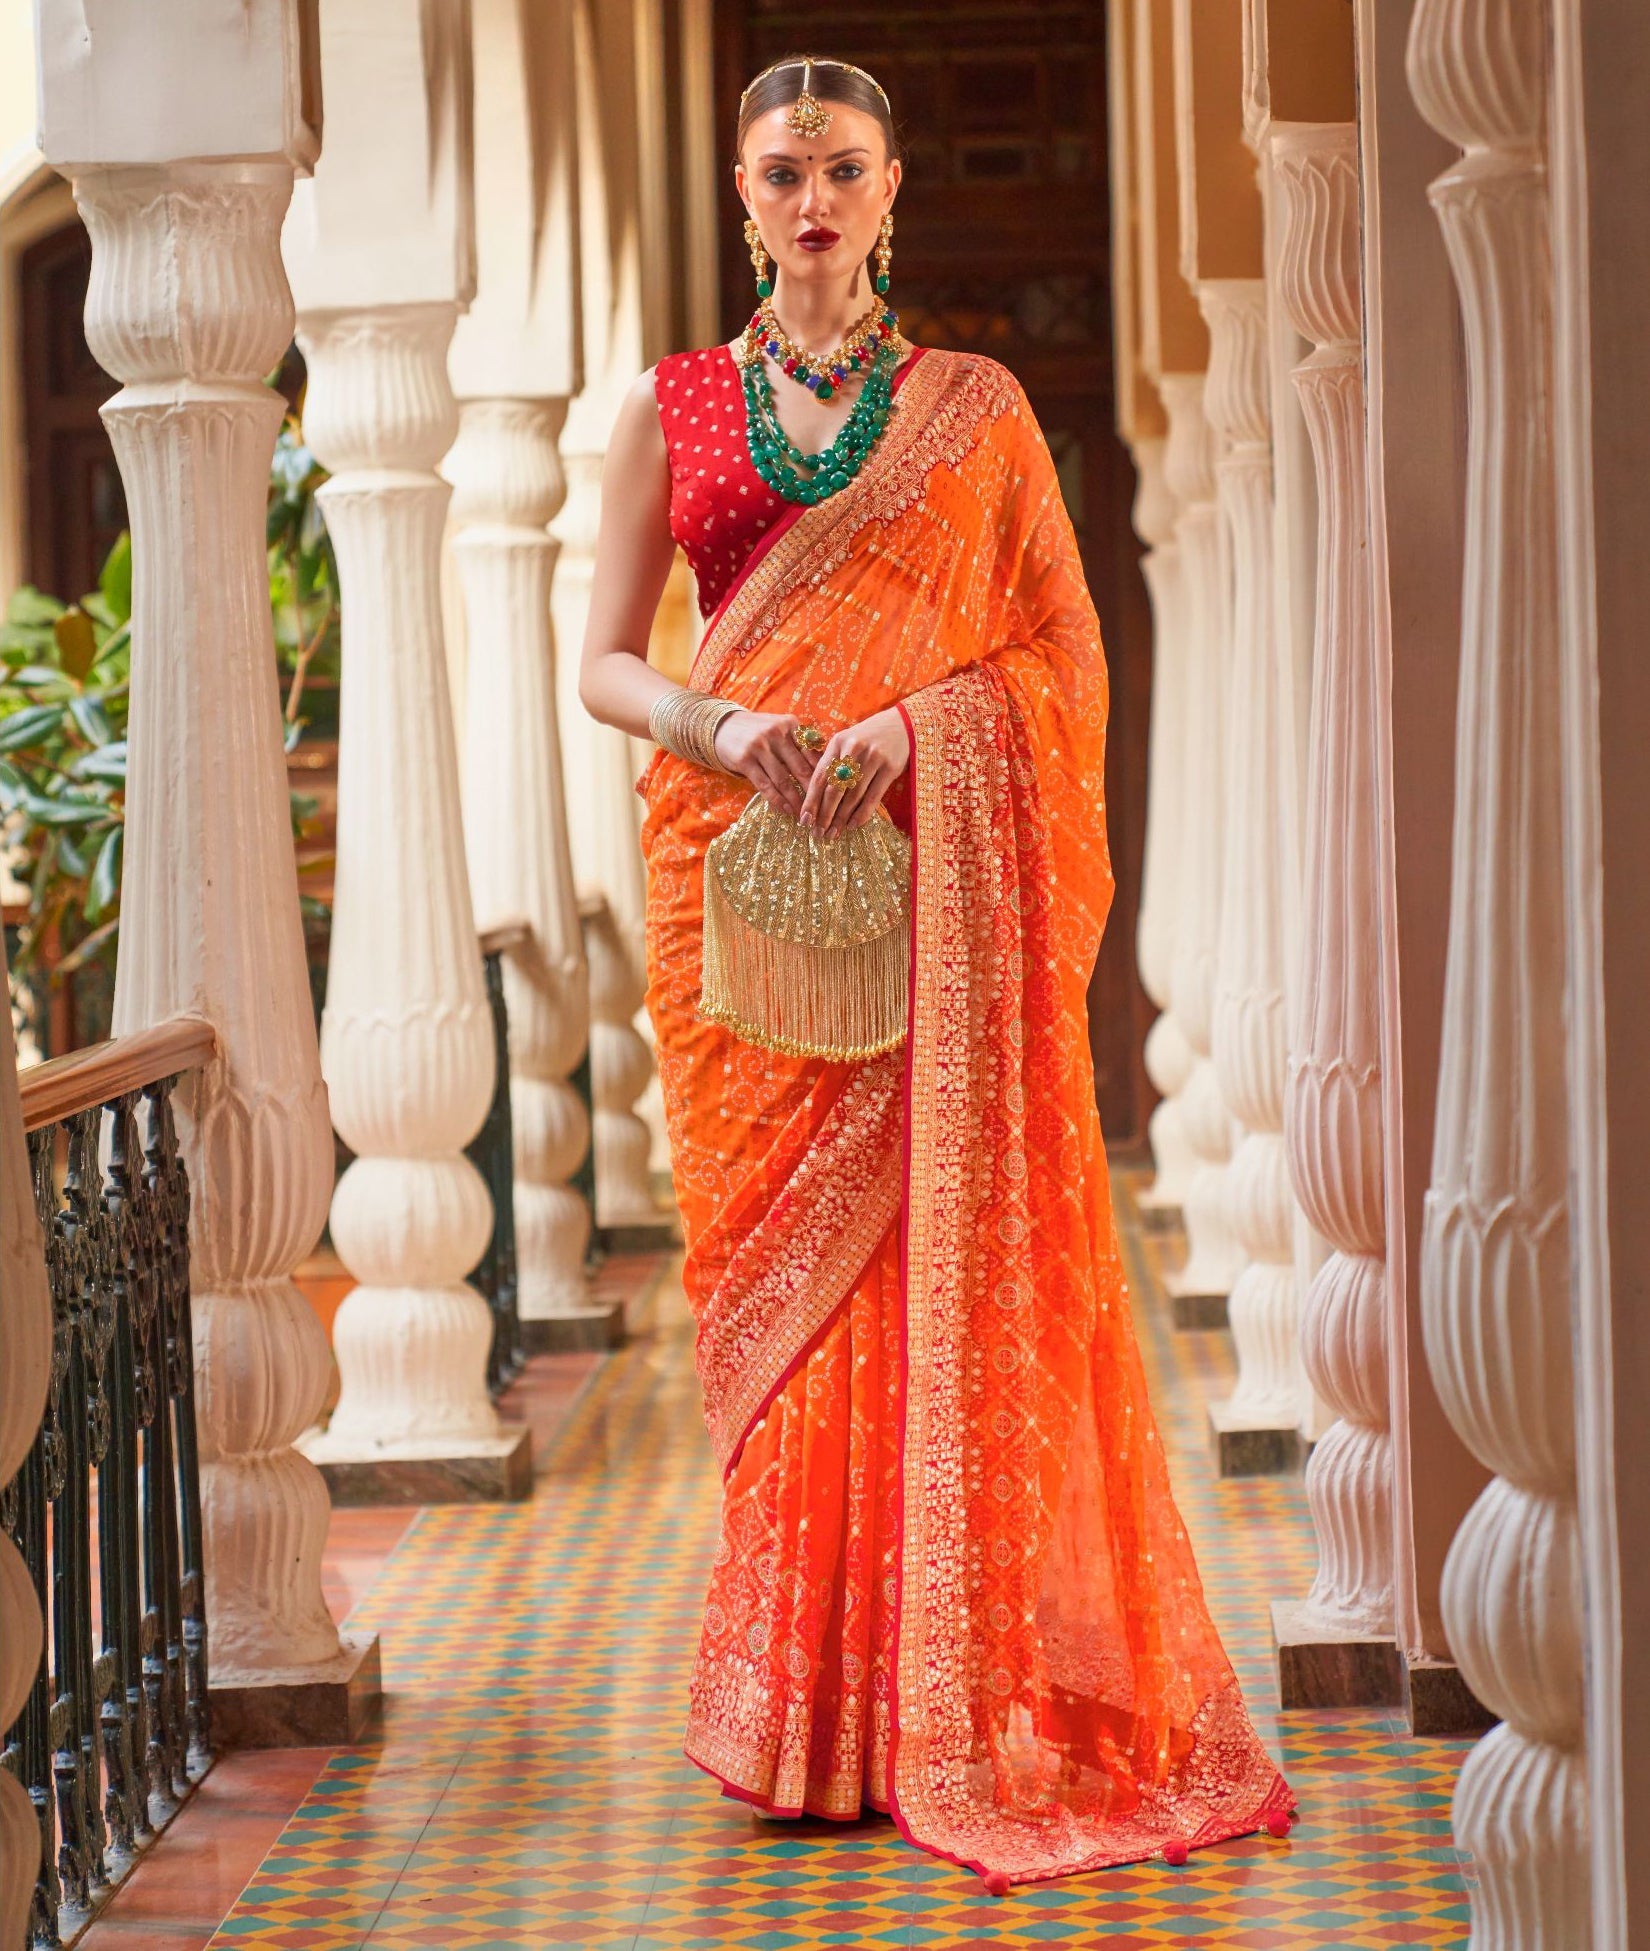 Remarkable Orange Color Silk Weave Saree With With Designer Border And  Blouse